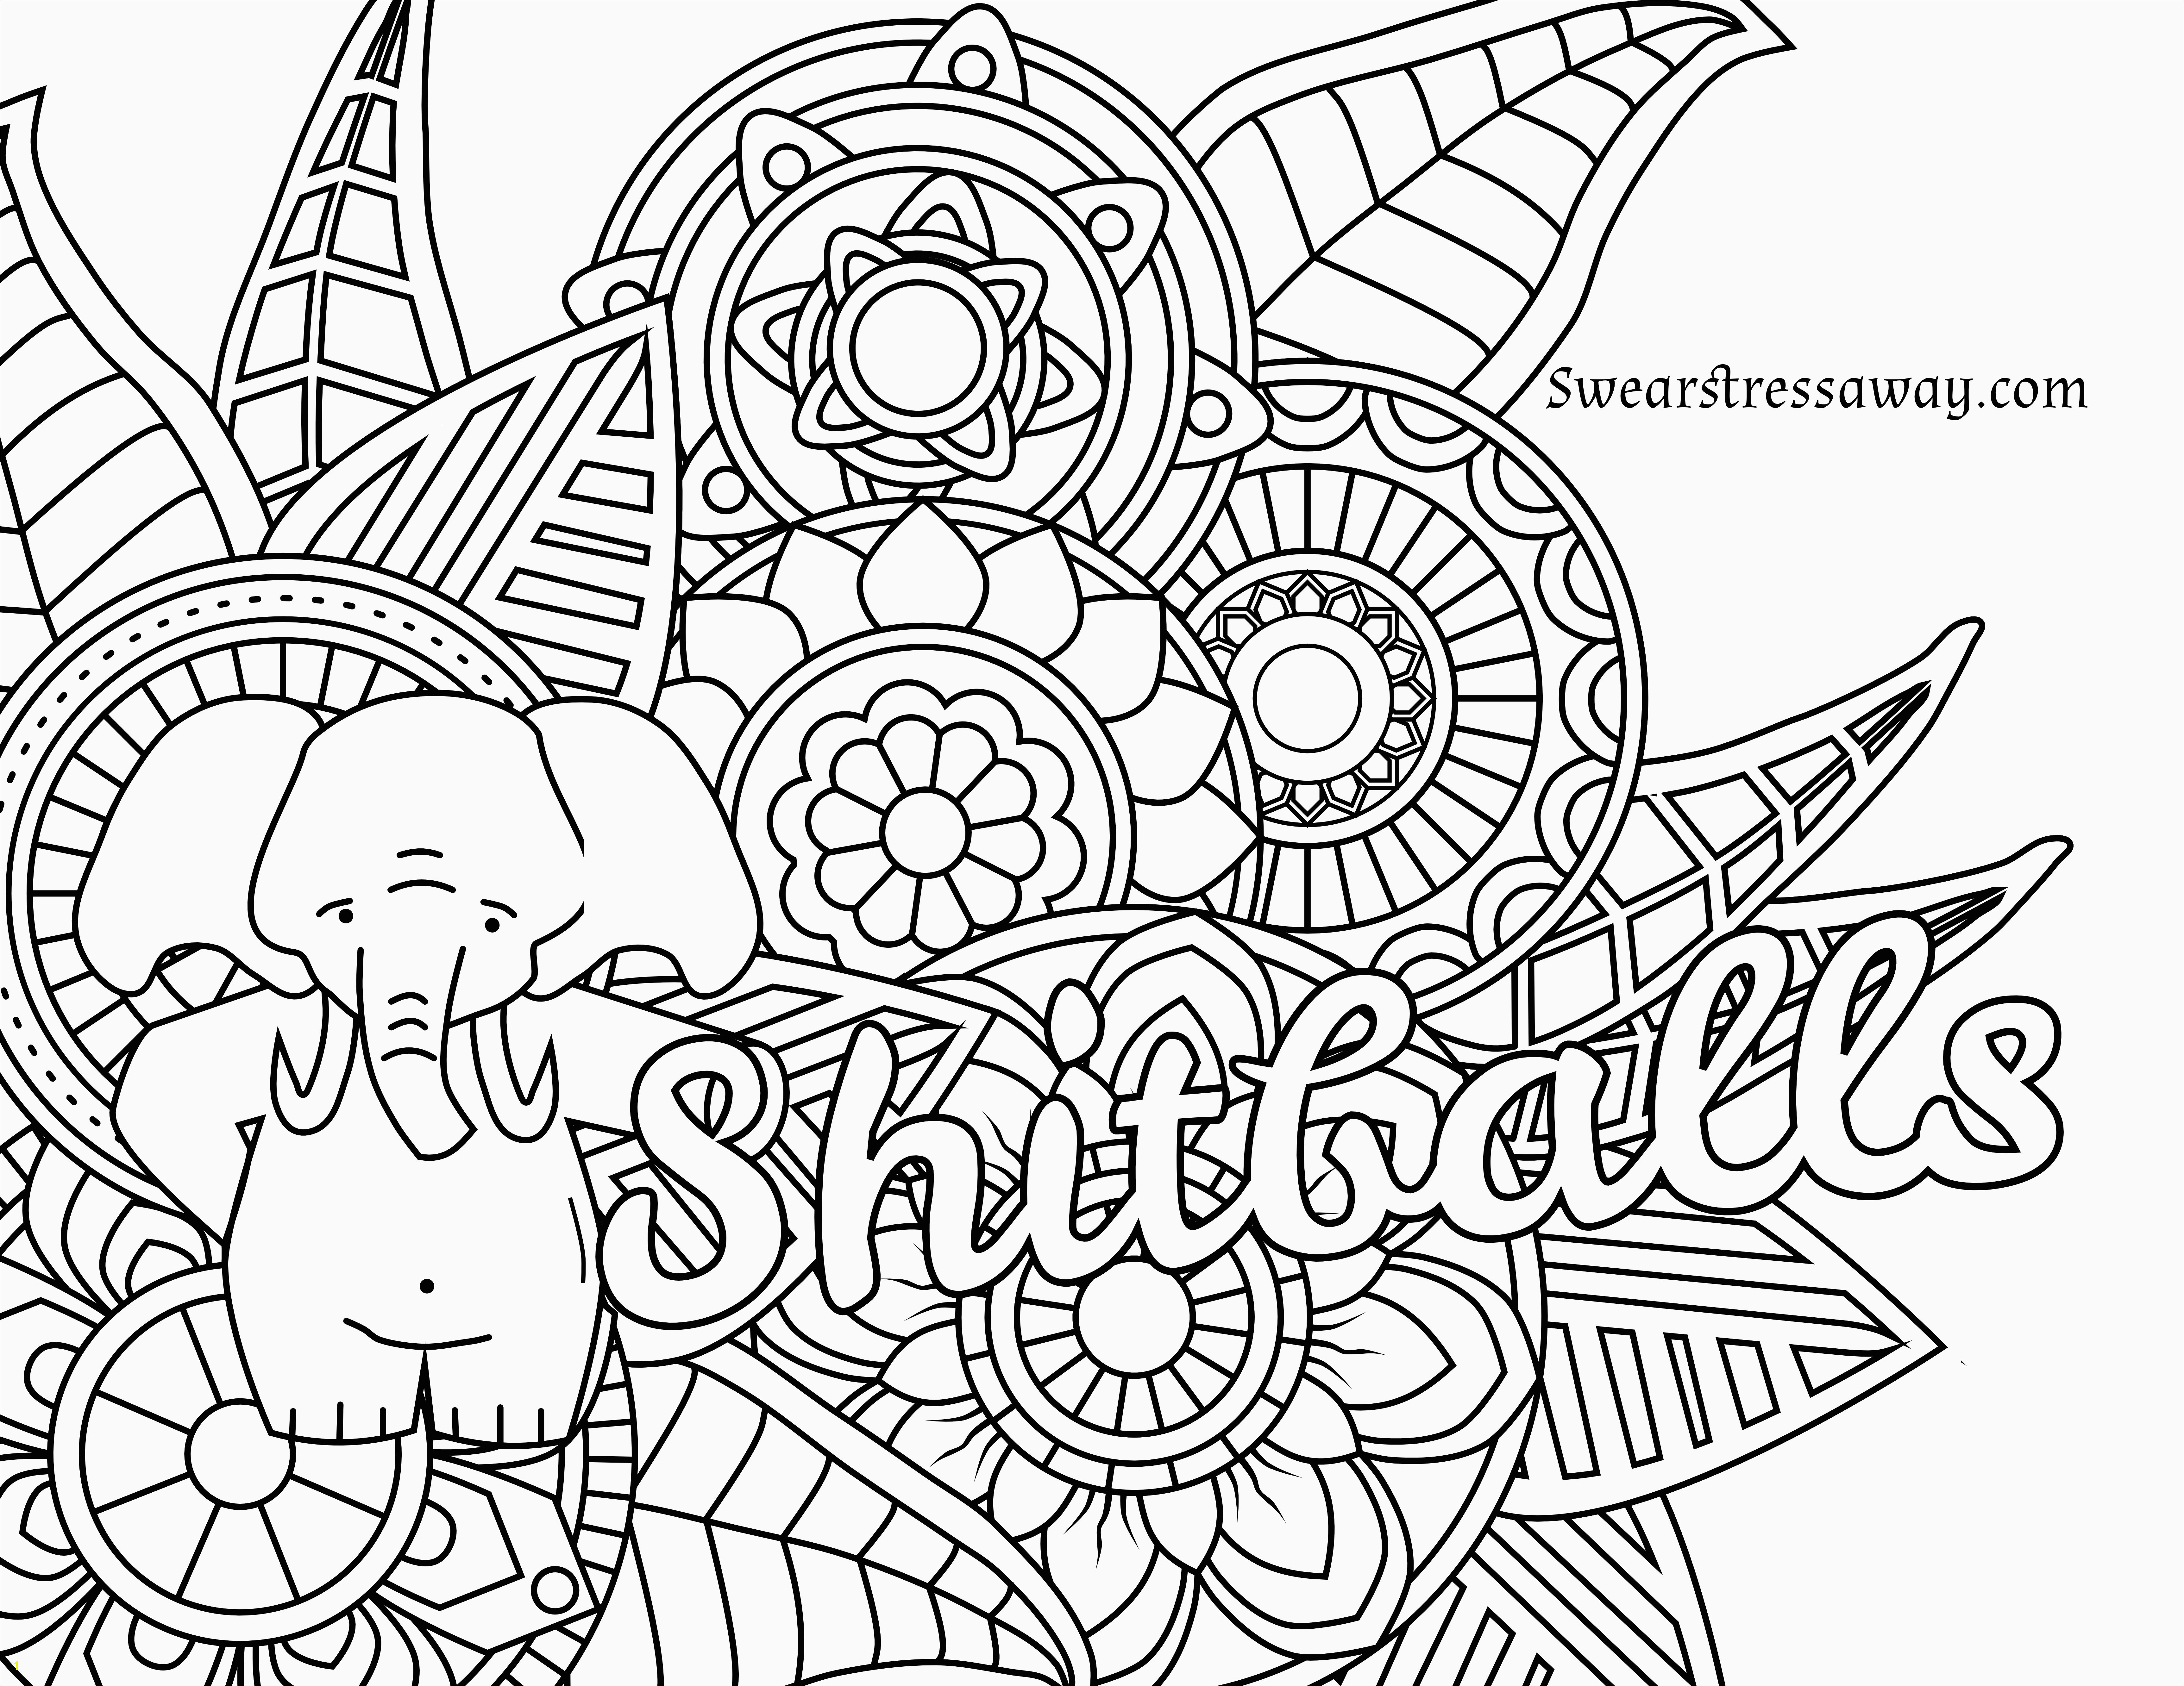 Free Swear Word Coloring Pages for Adults and Engaging Fall Coloring Pages Printable 26 Kids New